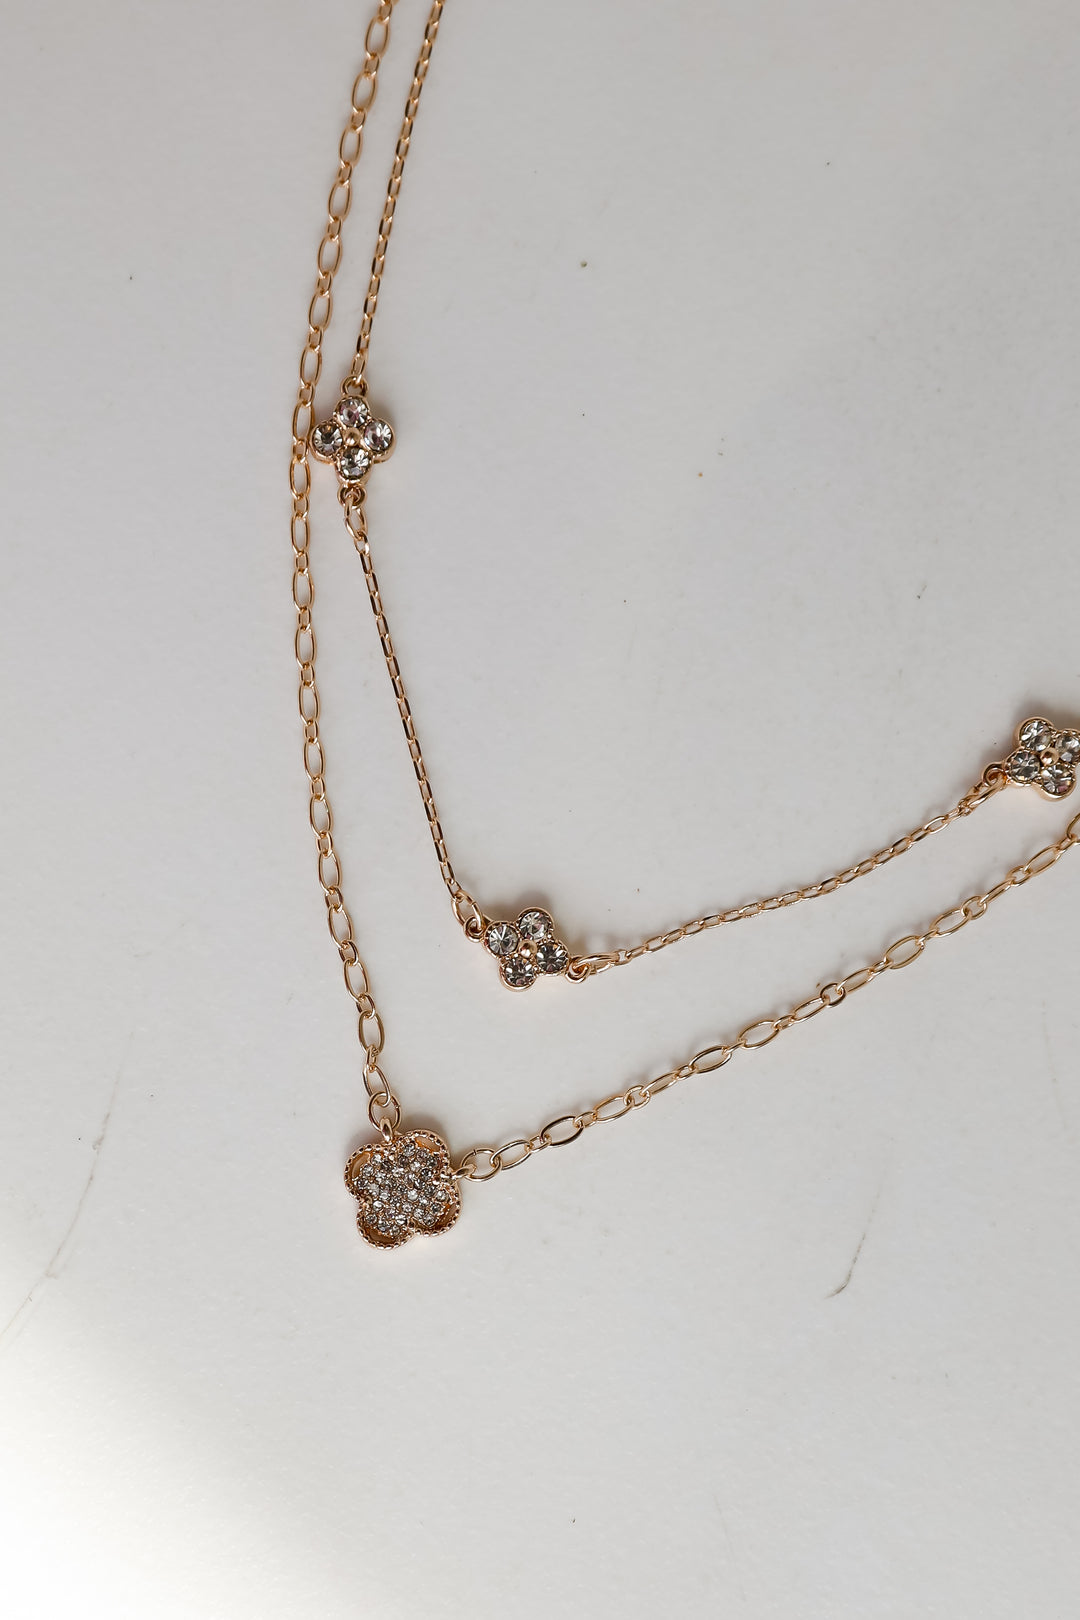 Paige Layered Chain Necklace gold dainty jewelry